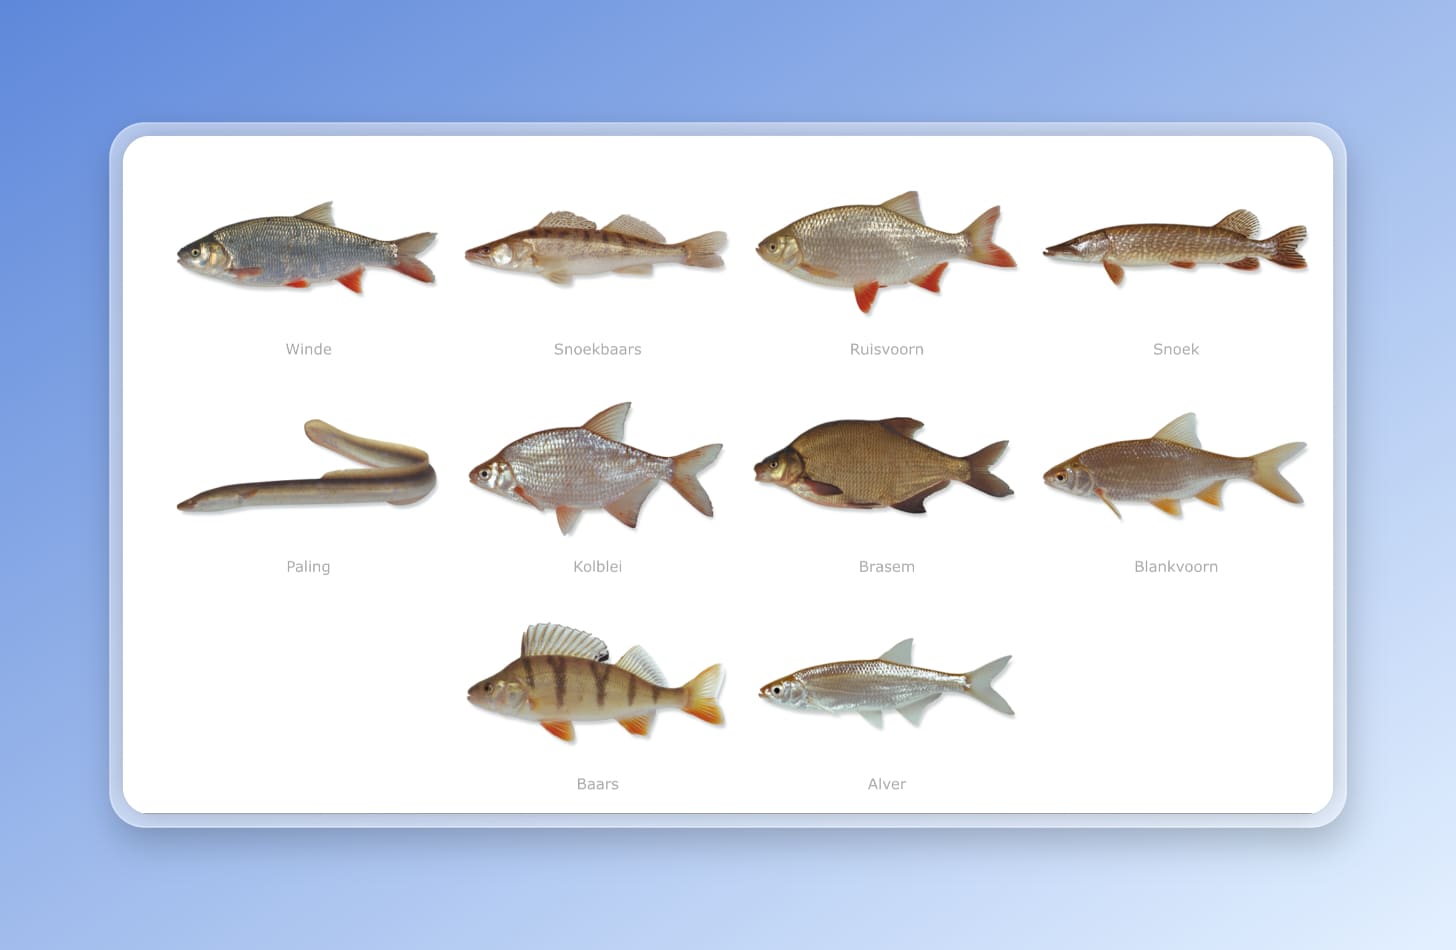 Photos of a number of different fish species